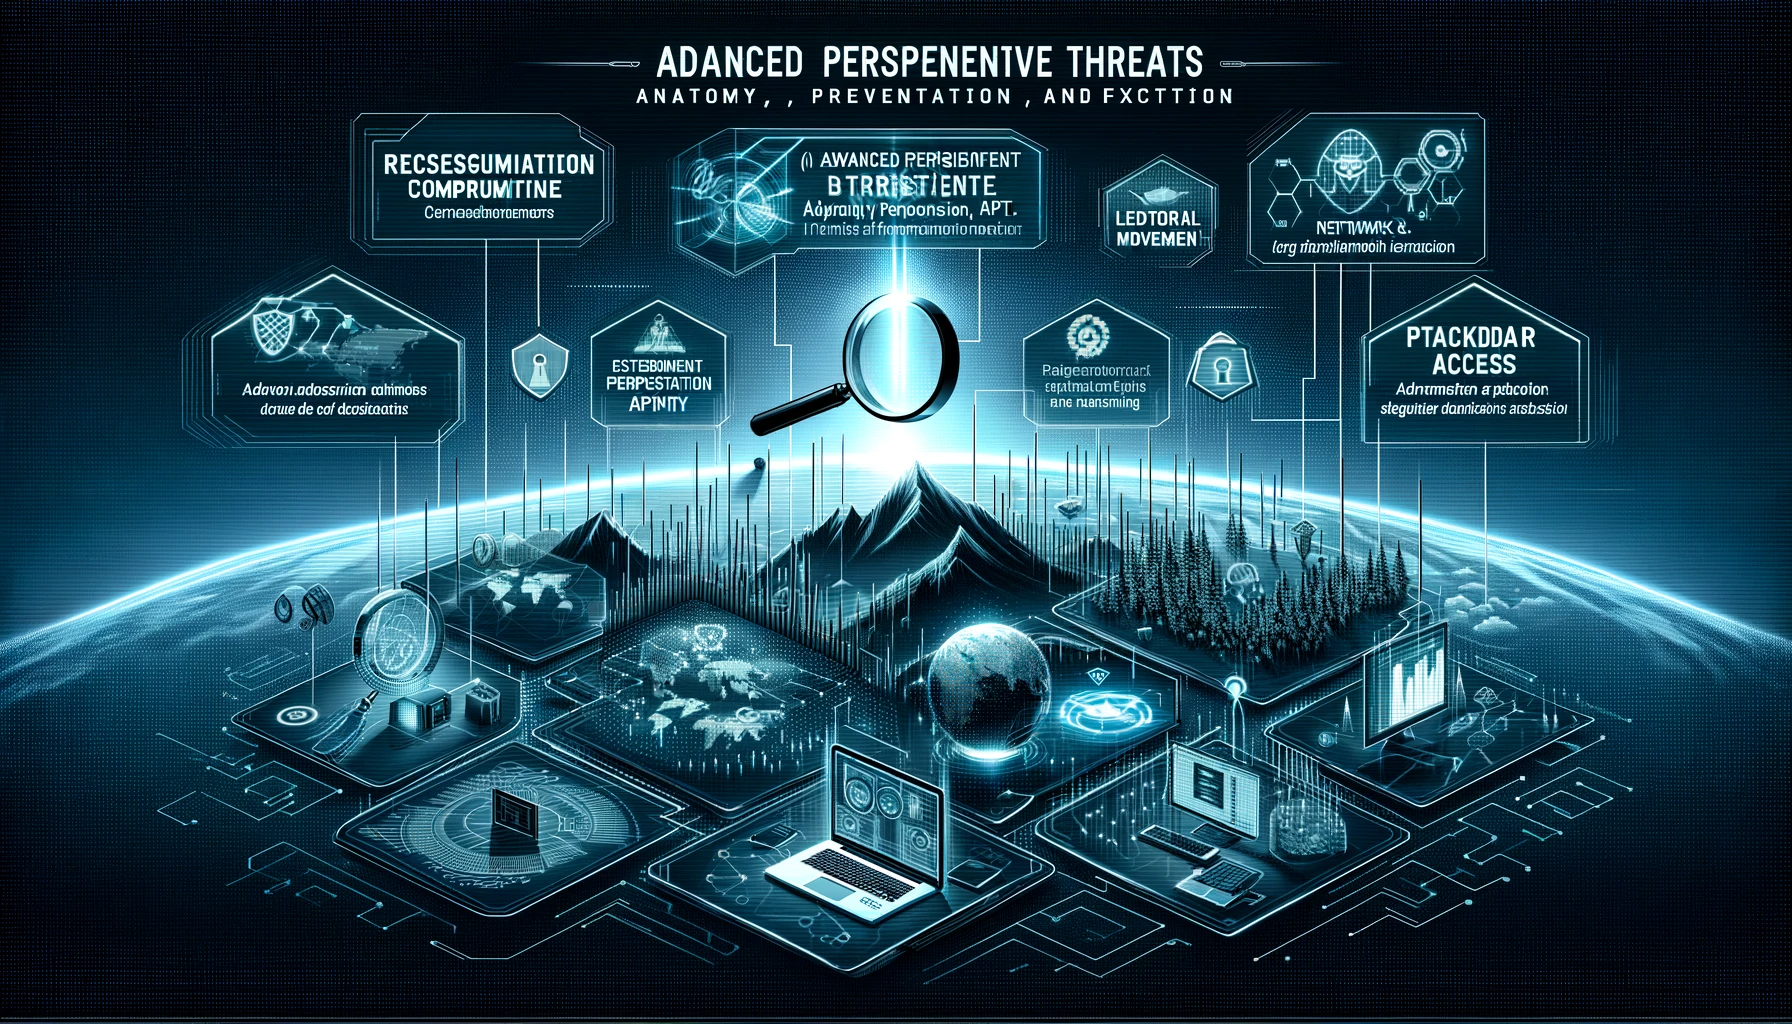 Demystifying Advanced Persistent Threats (APT): Anatomy, Prevention, and Detection